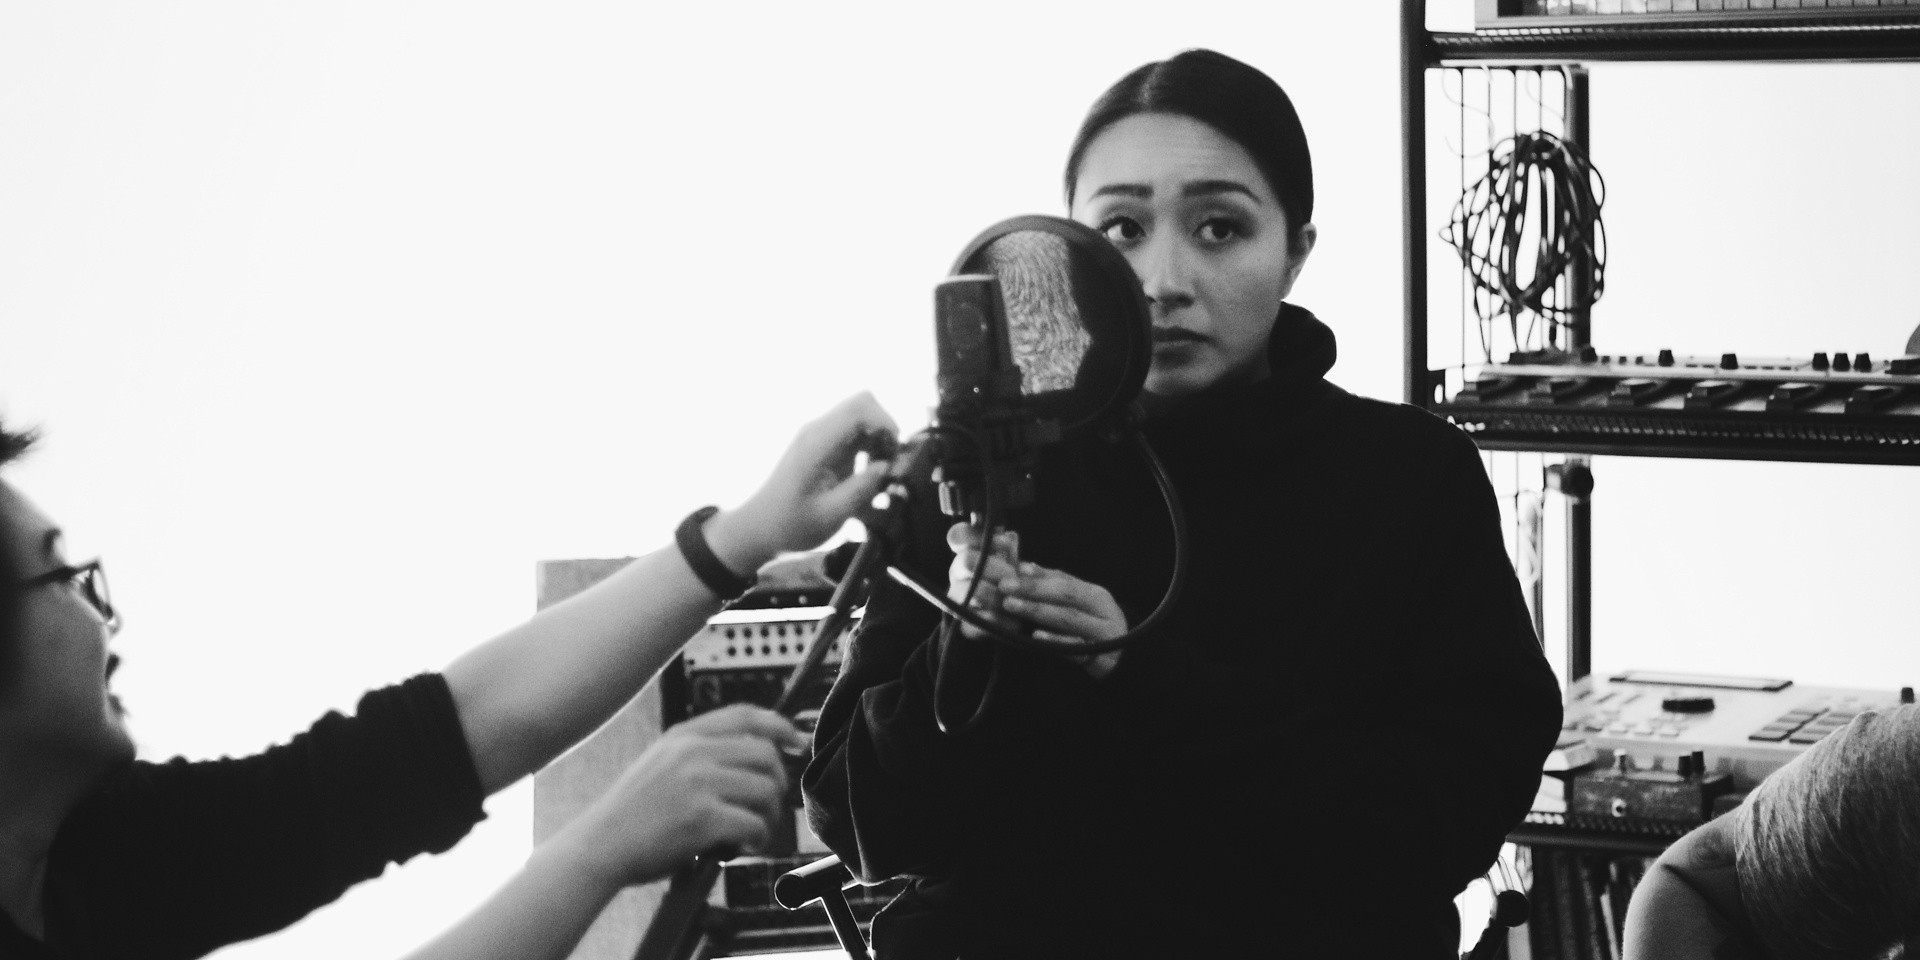 Go behind the scenes with Armi Millare's 'Kapit' music video shoot – photo gallery